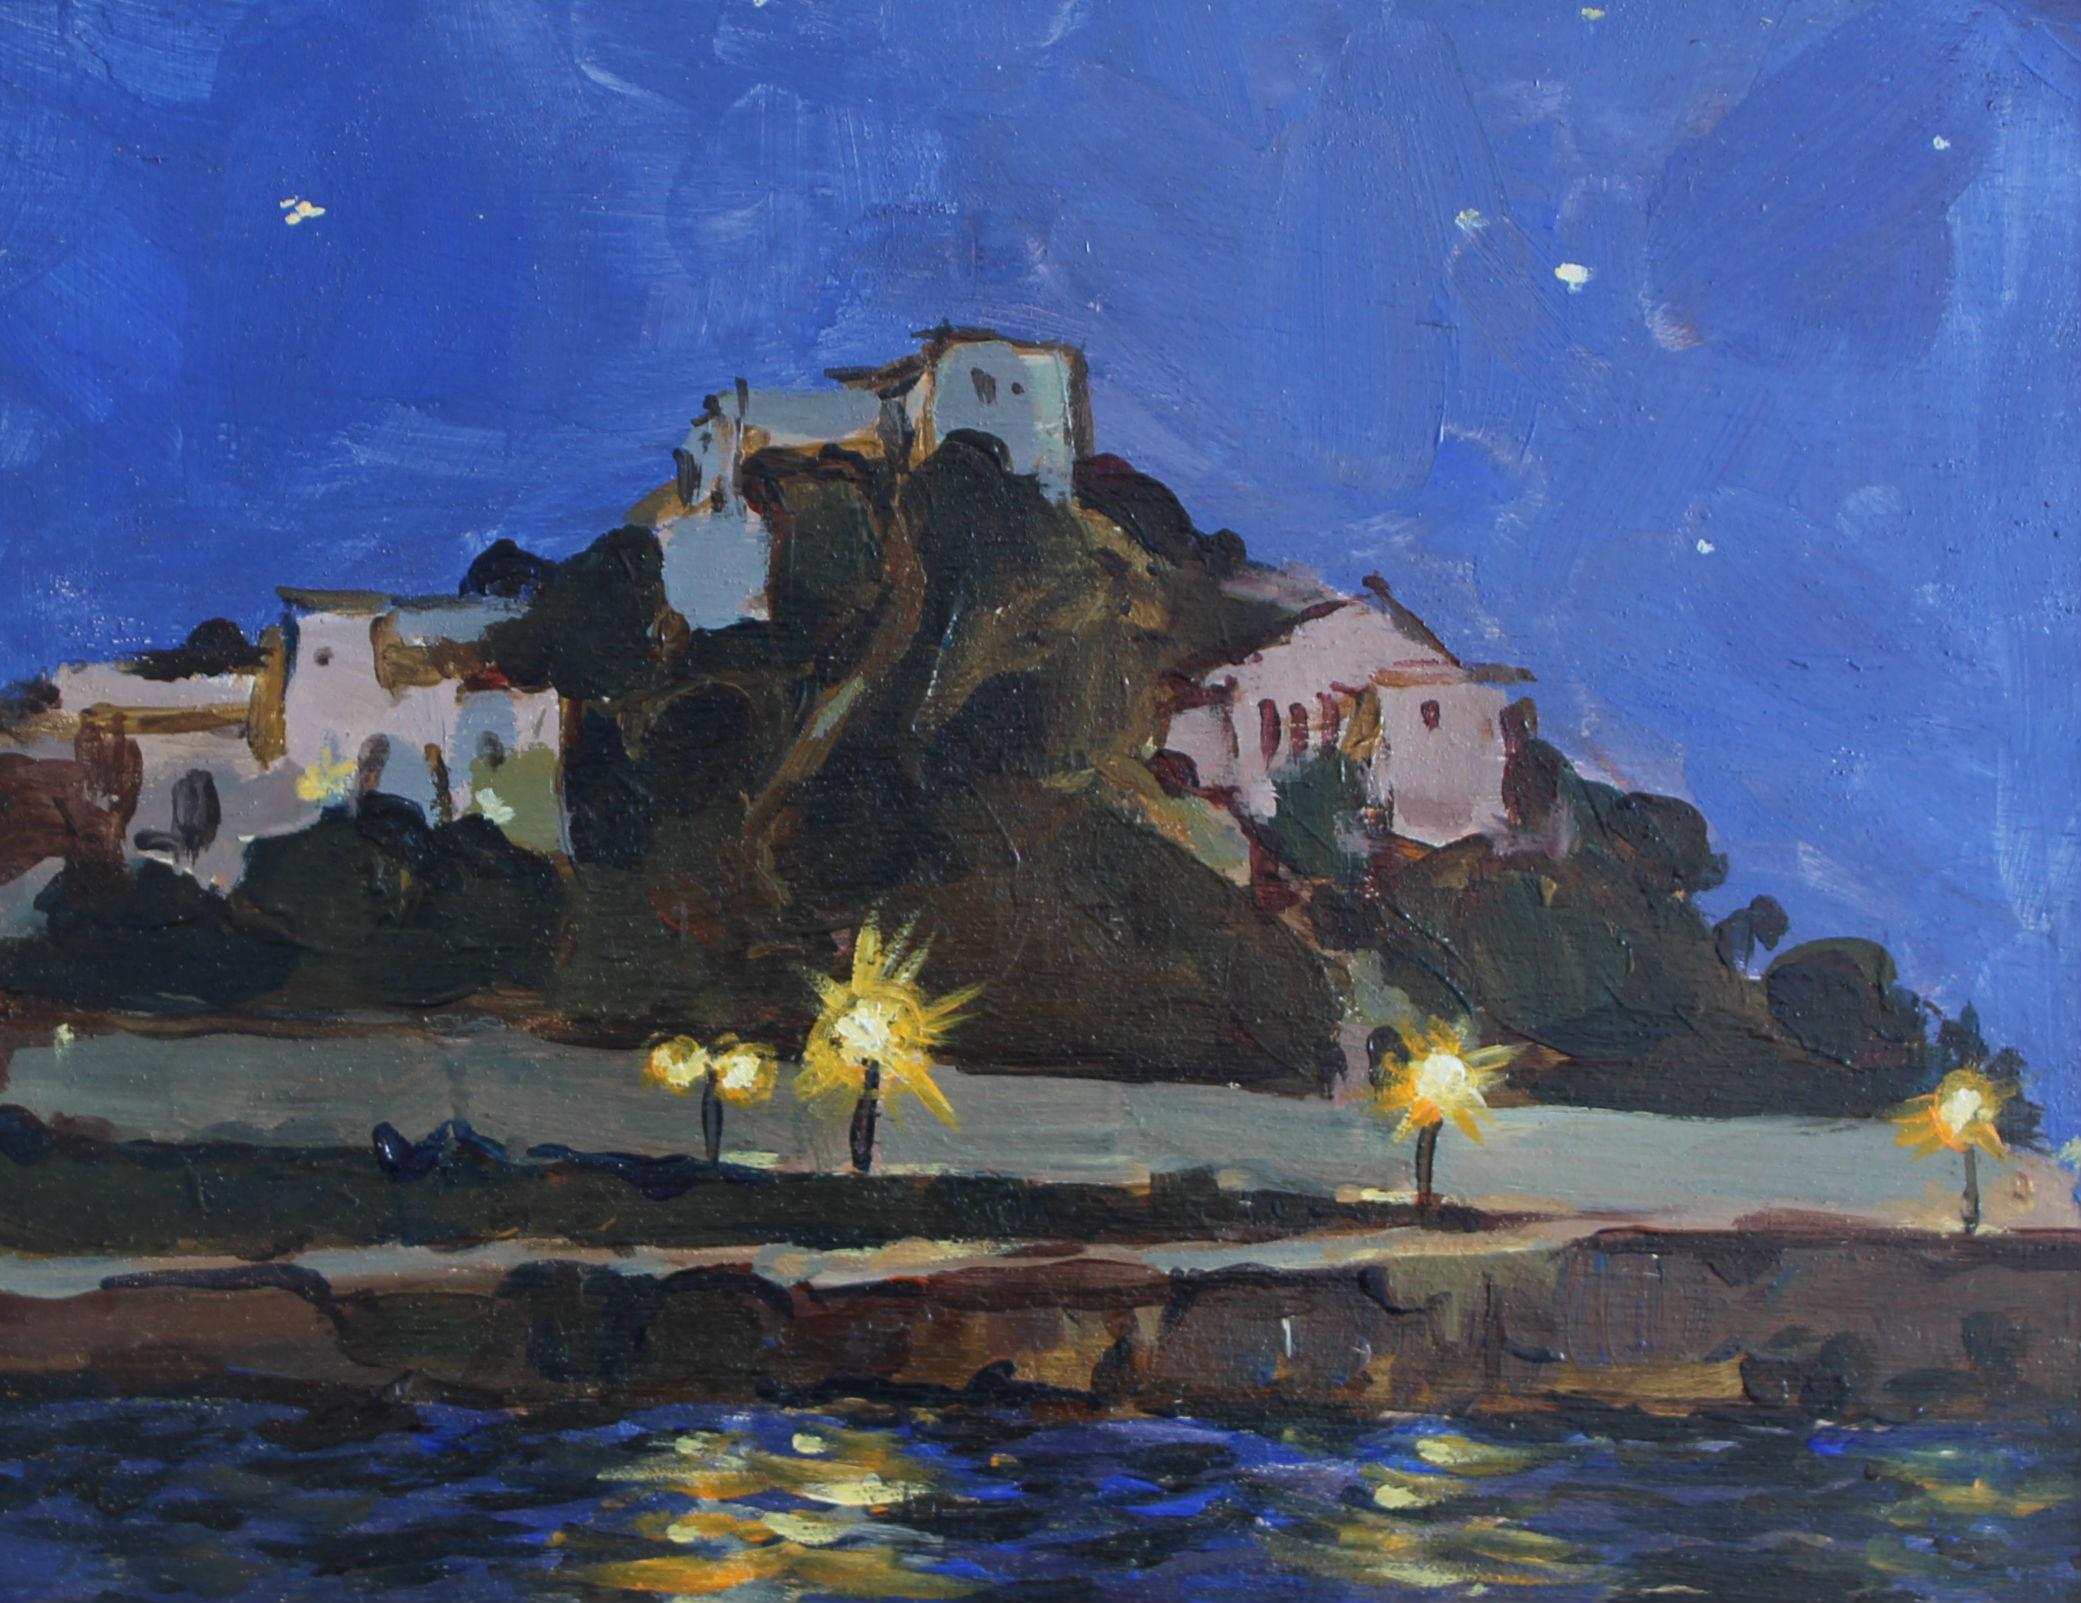 Janusz Szpyt Landscape Painting - Beach at night, Posidonia - Contemporary Landscape Oil Painting Realism Nocturn